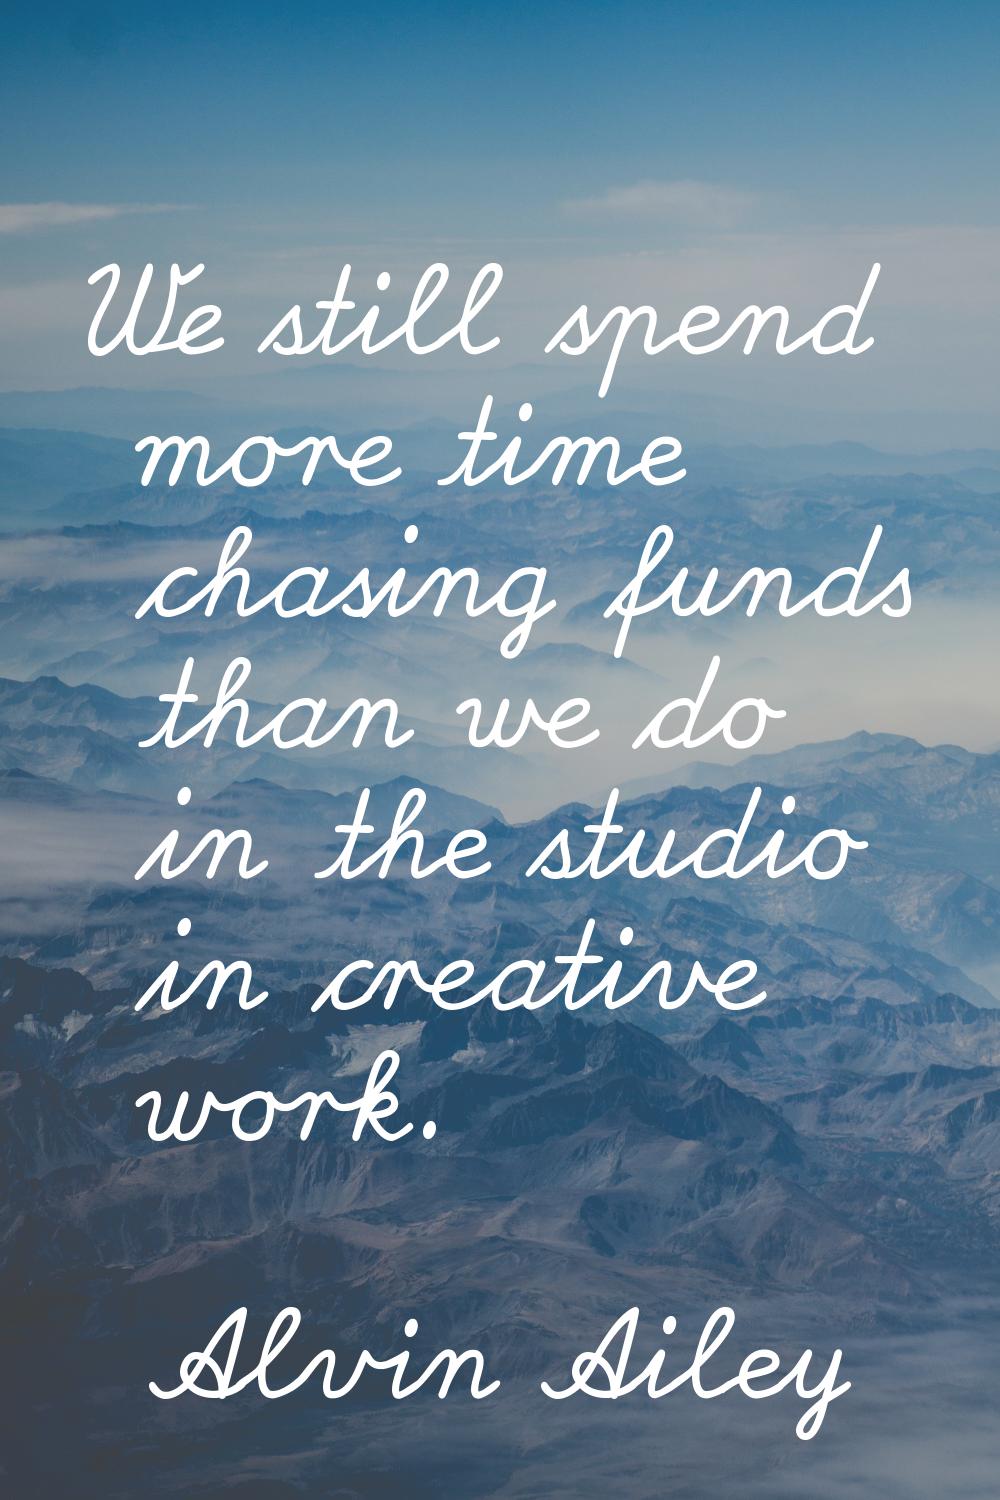 We still spend more time chasing funds than we do in the studio in creative work.